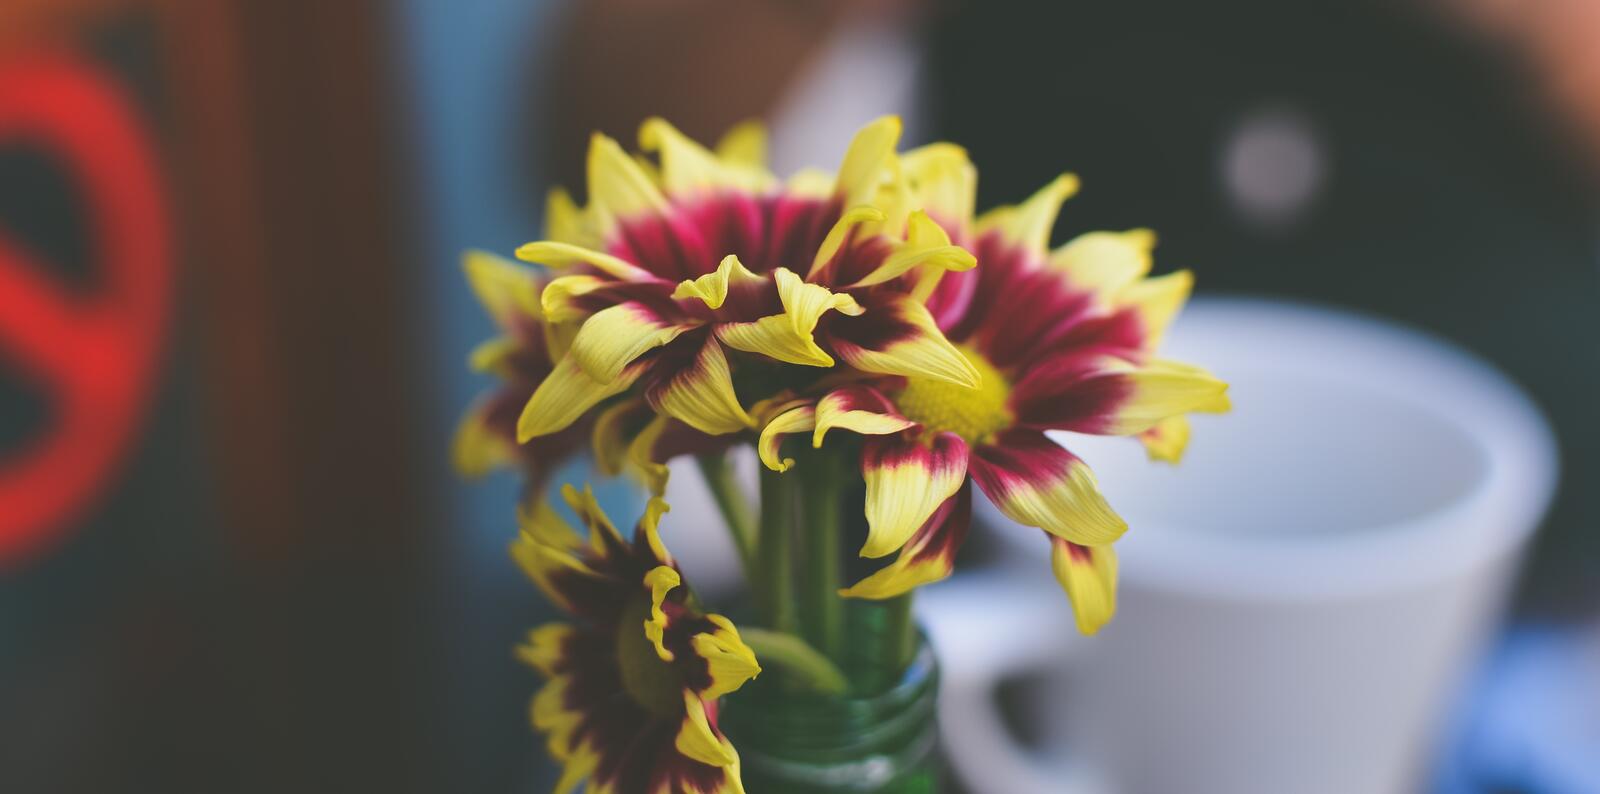 Free photo Yellow flowers in a vase